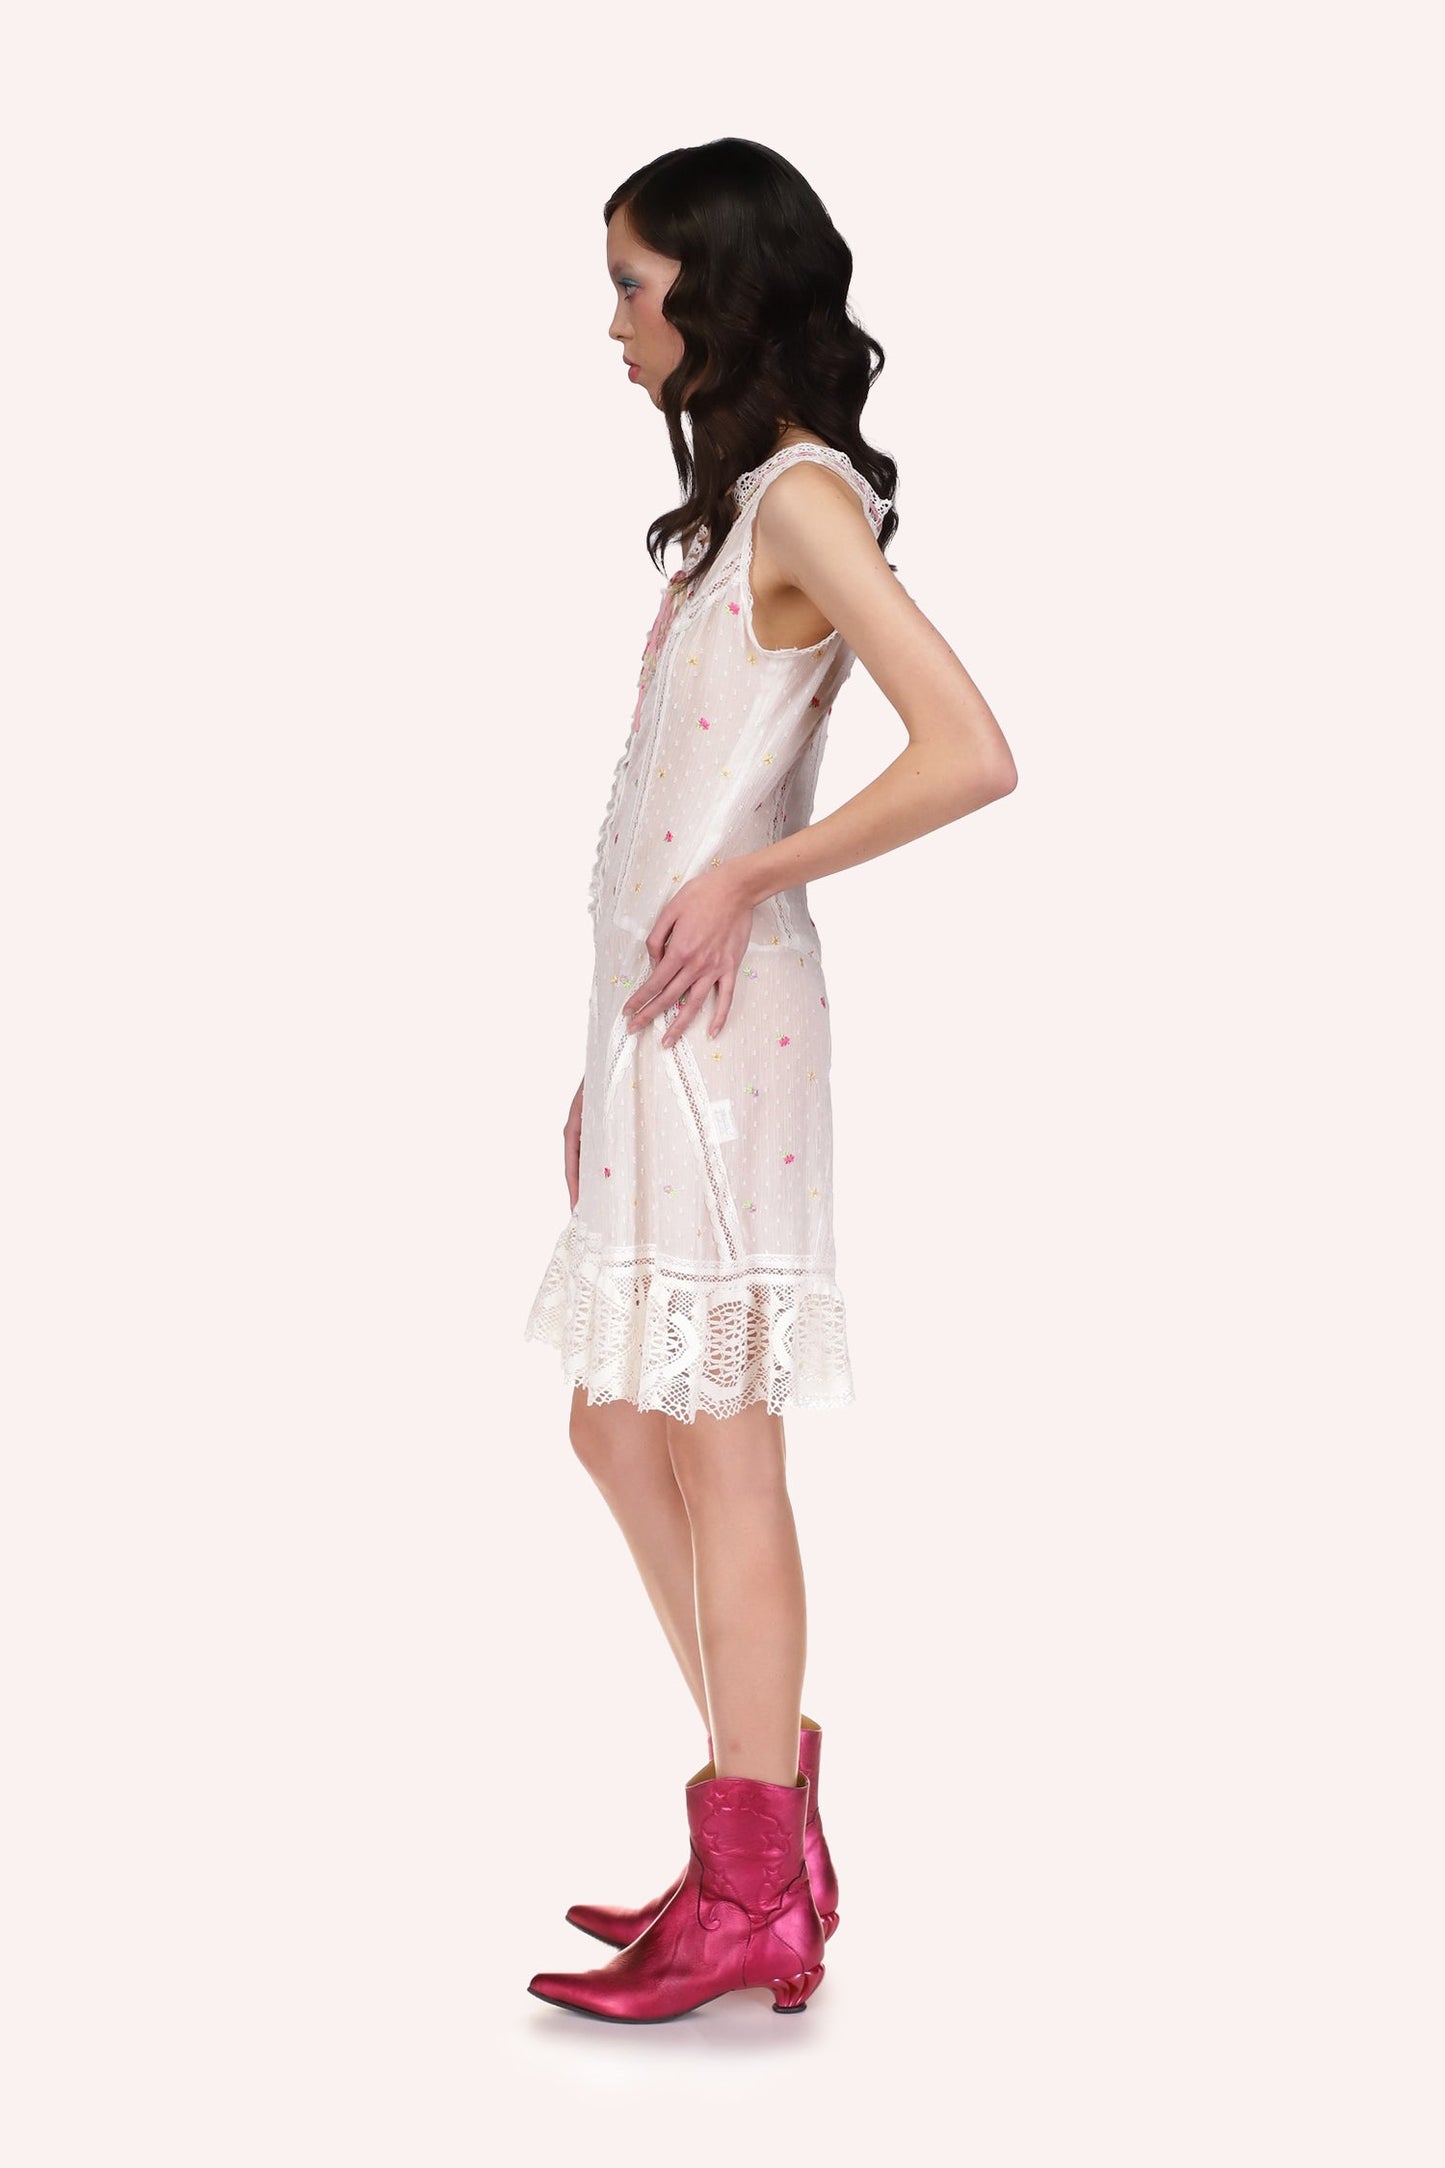 Cluny Lace Trimmed Floral Swiss Dot Slip Dress, white with triangular hems on the bottom part